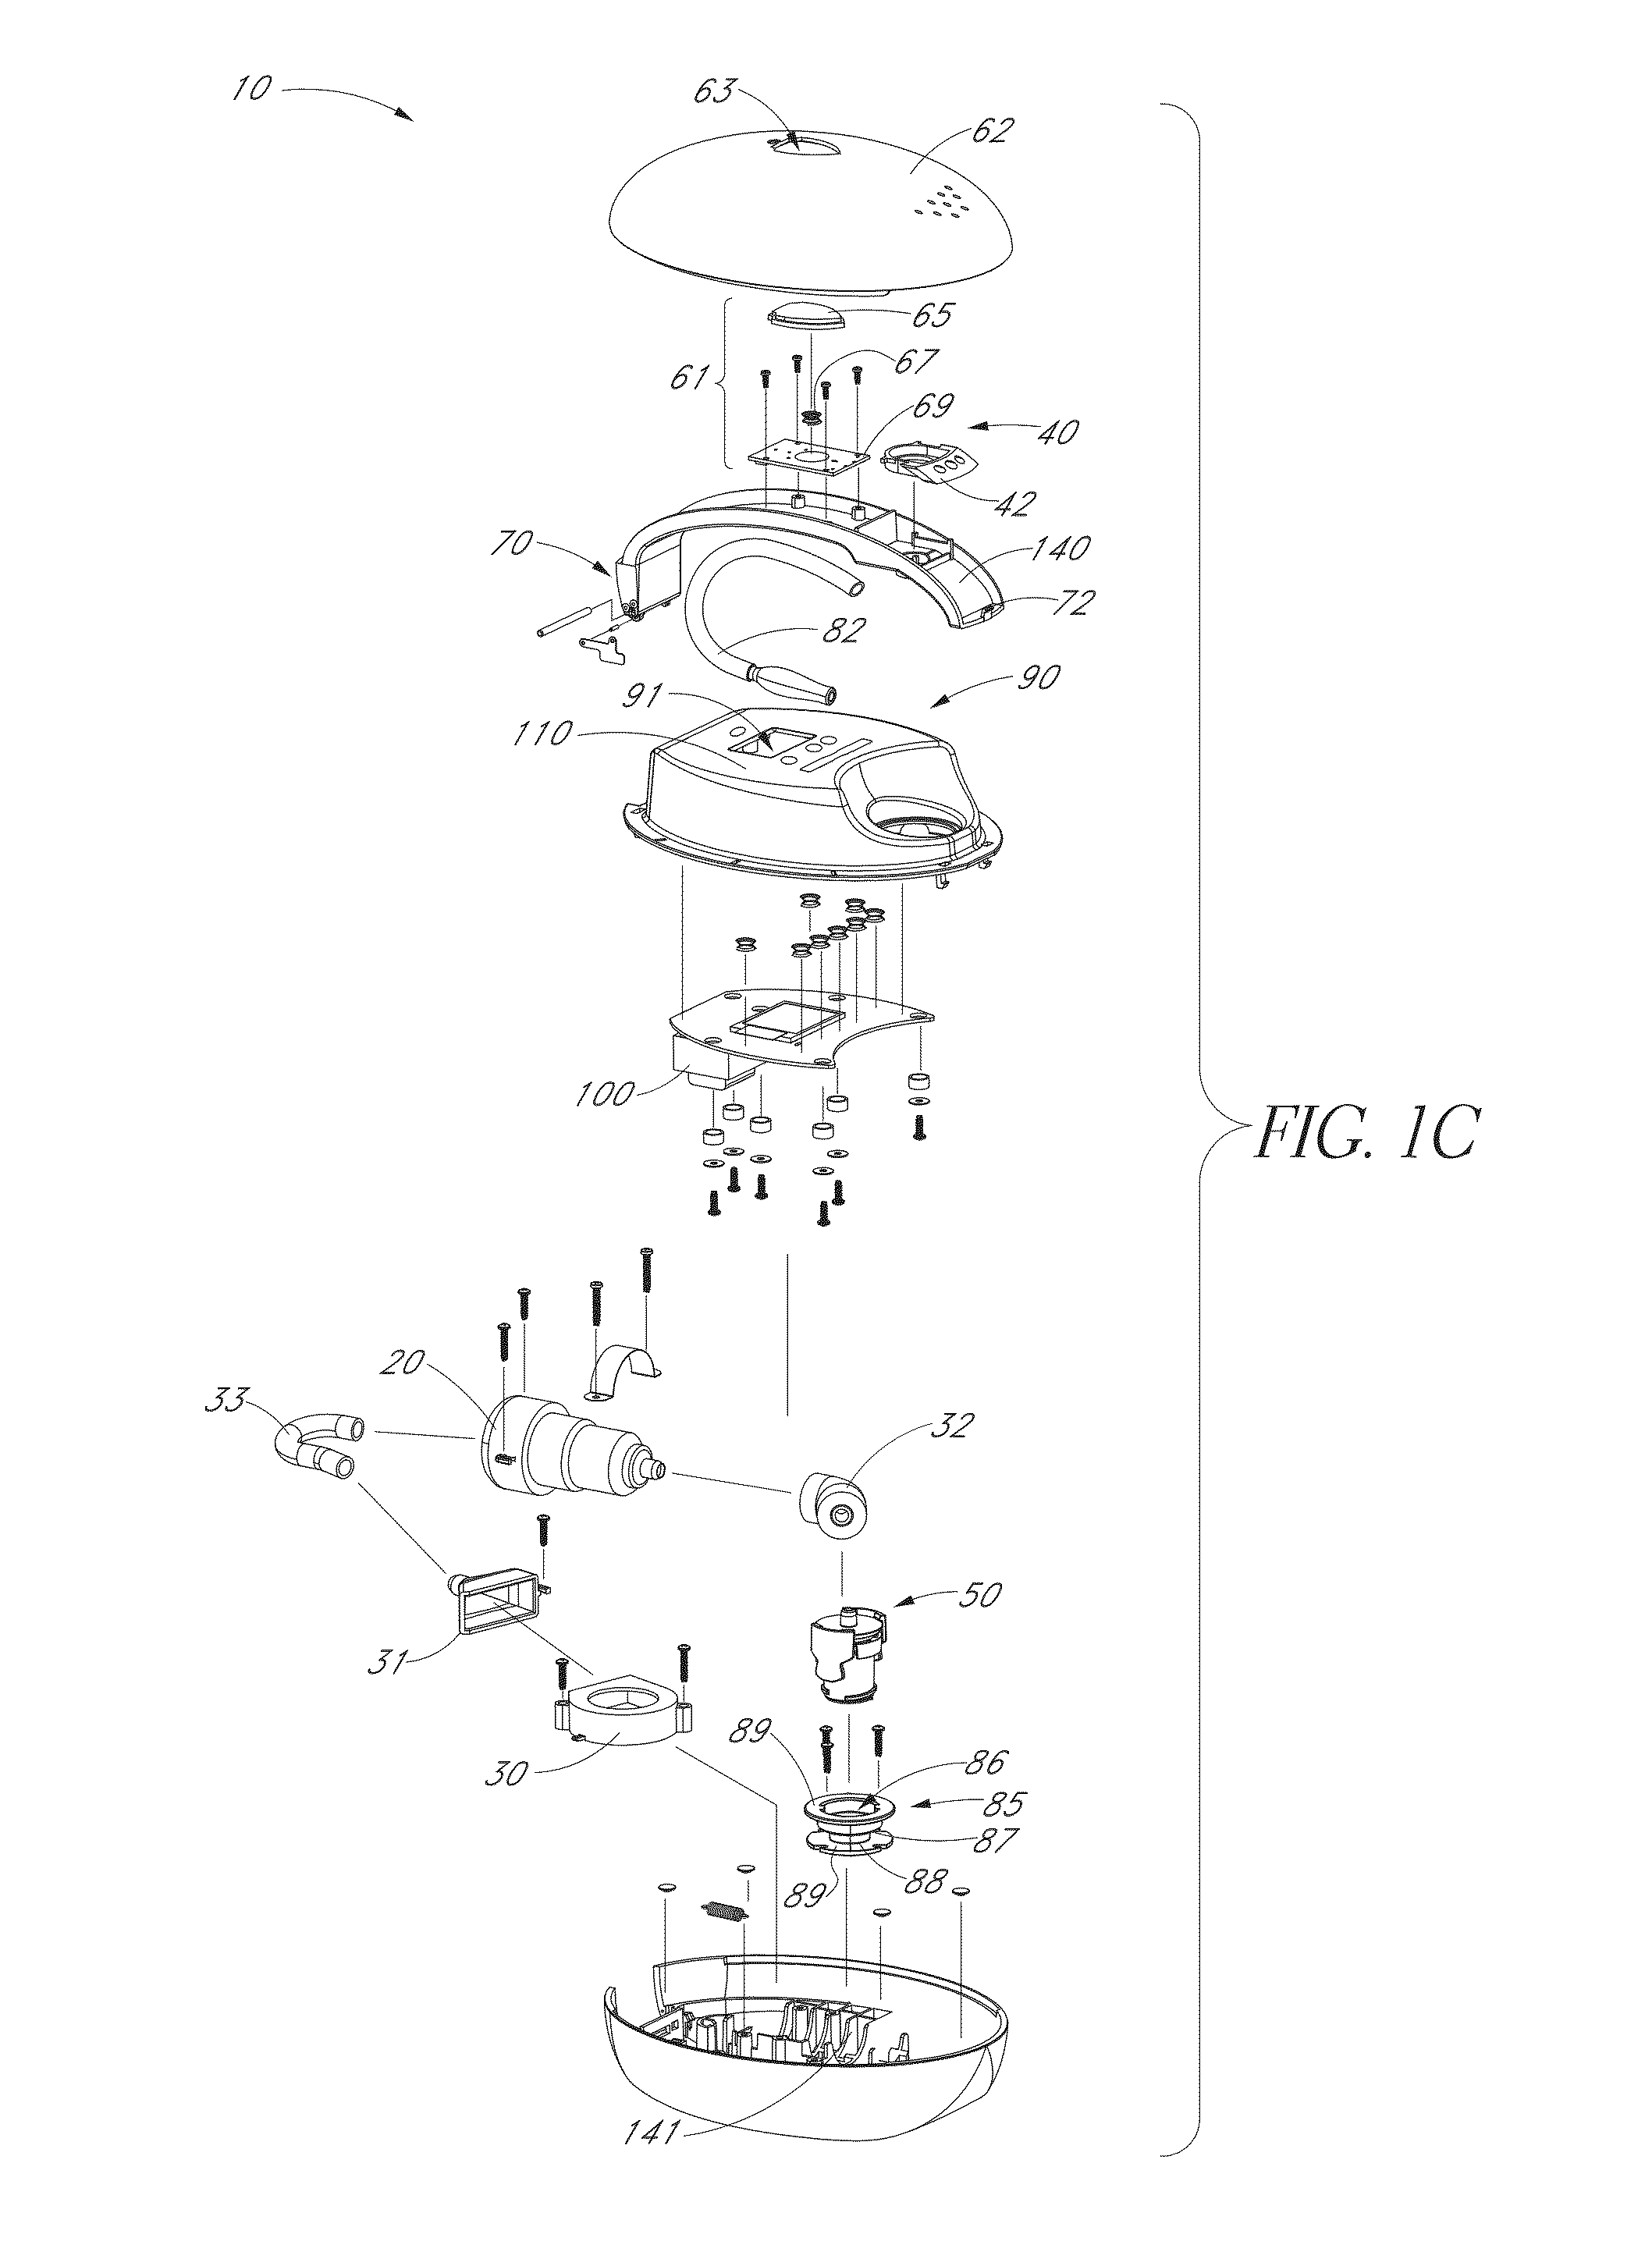 Transversely-activated valve for a therapeutic vaporizer bag attachment system